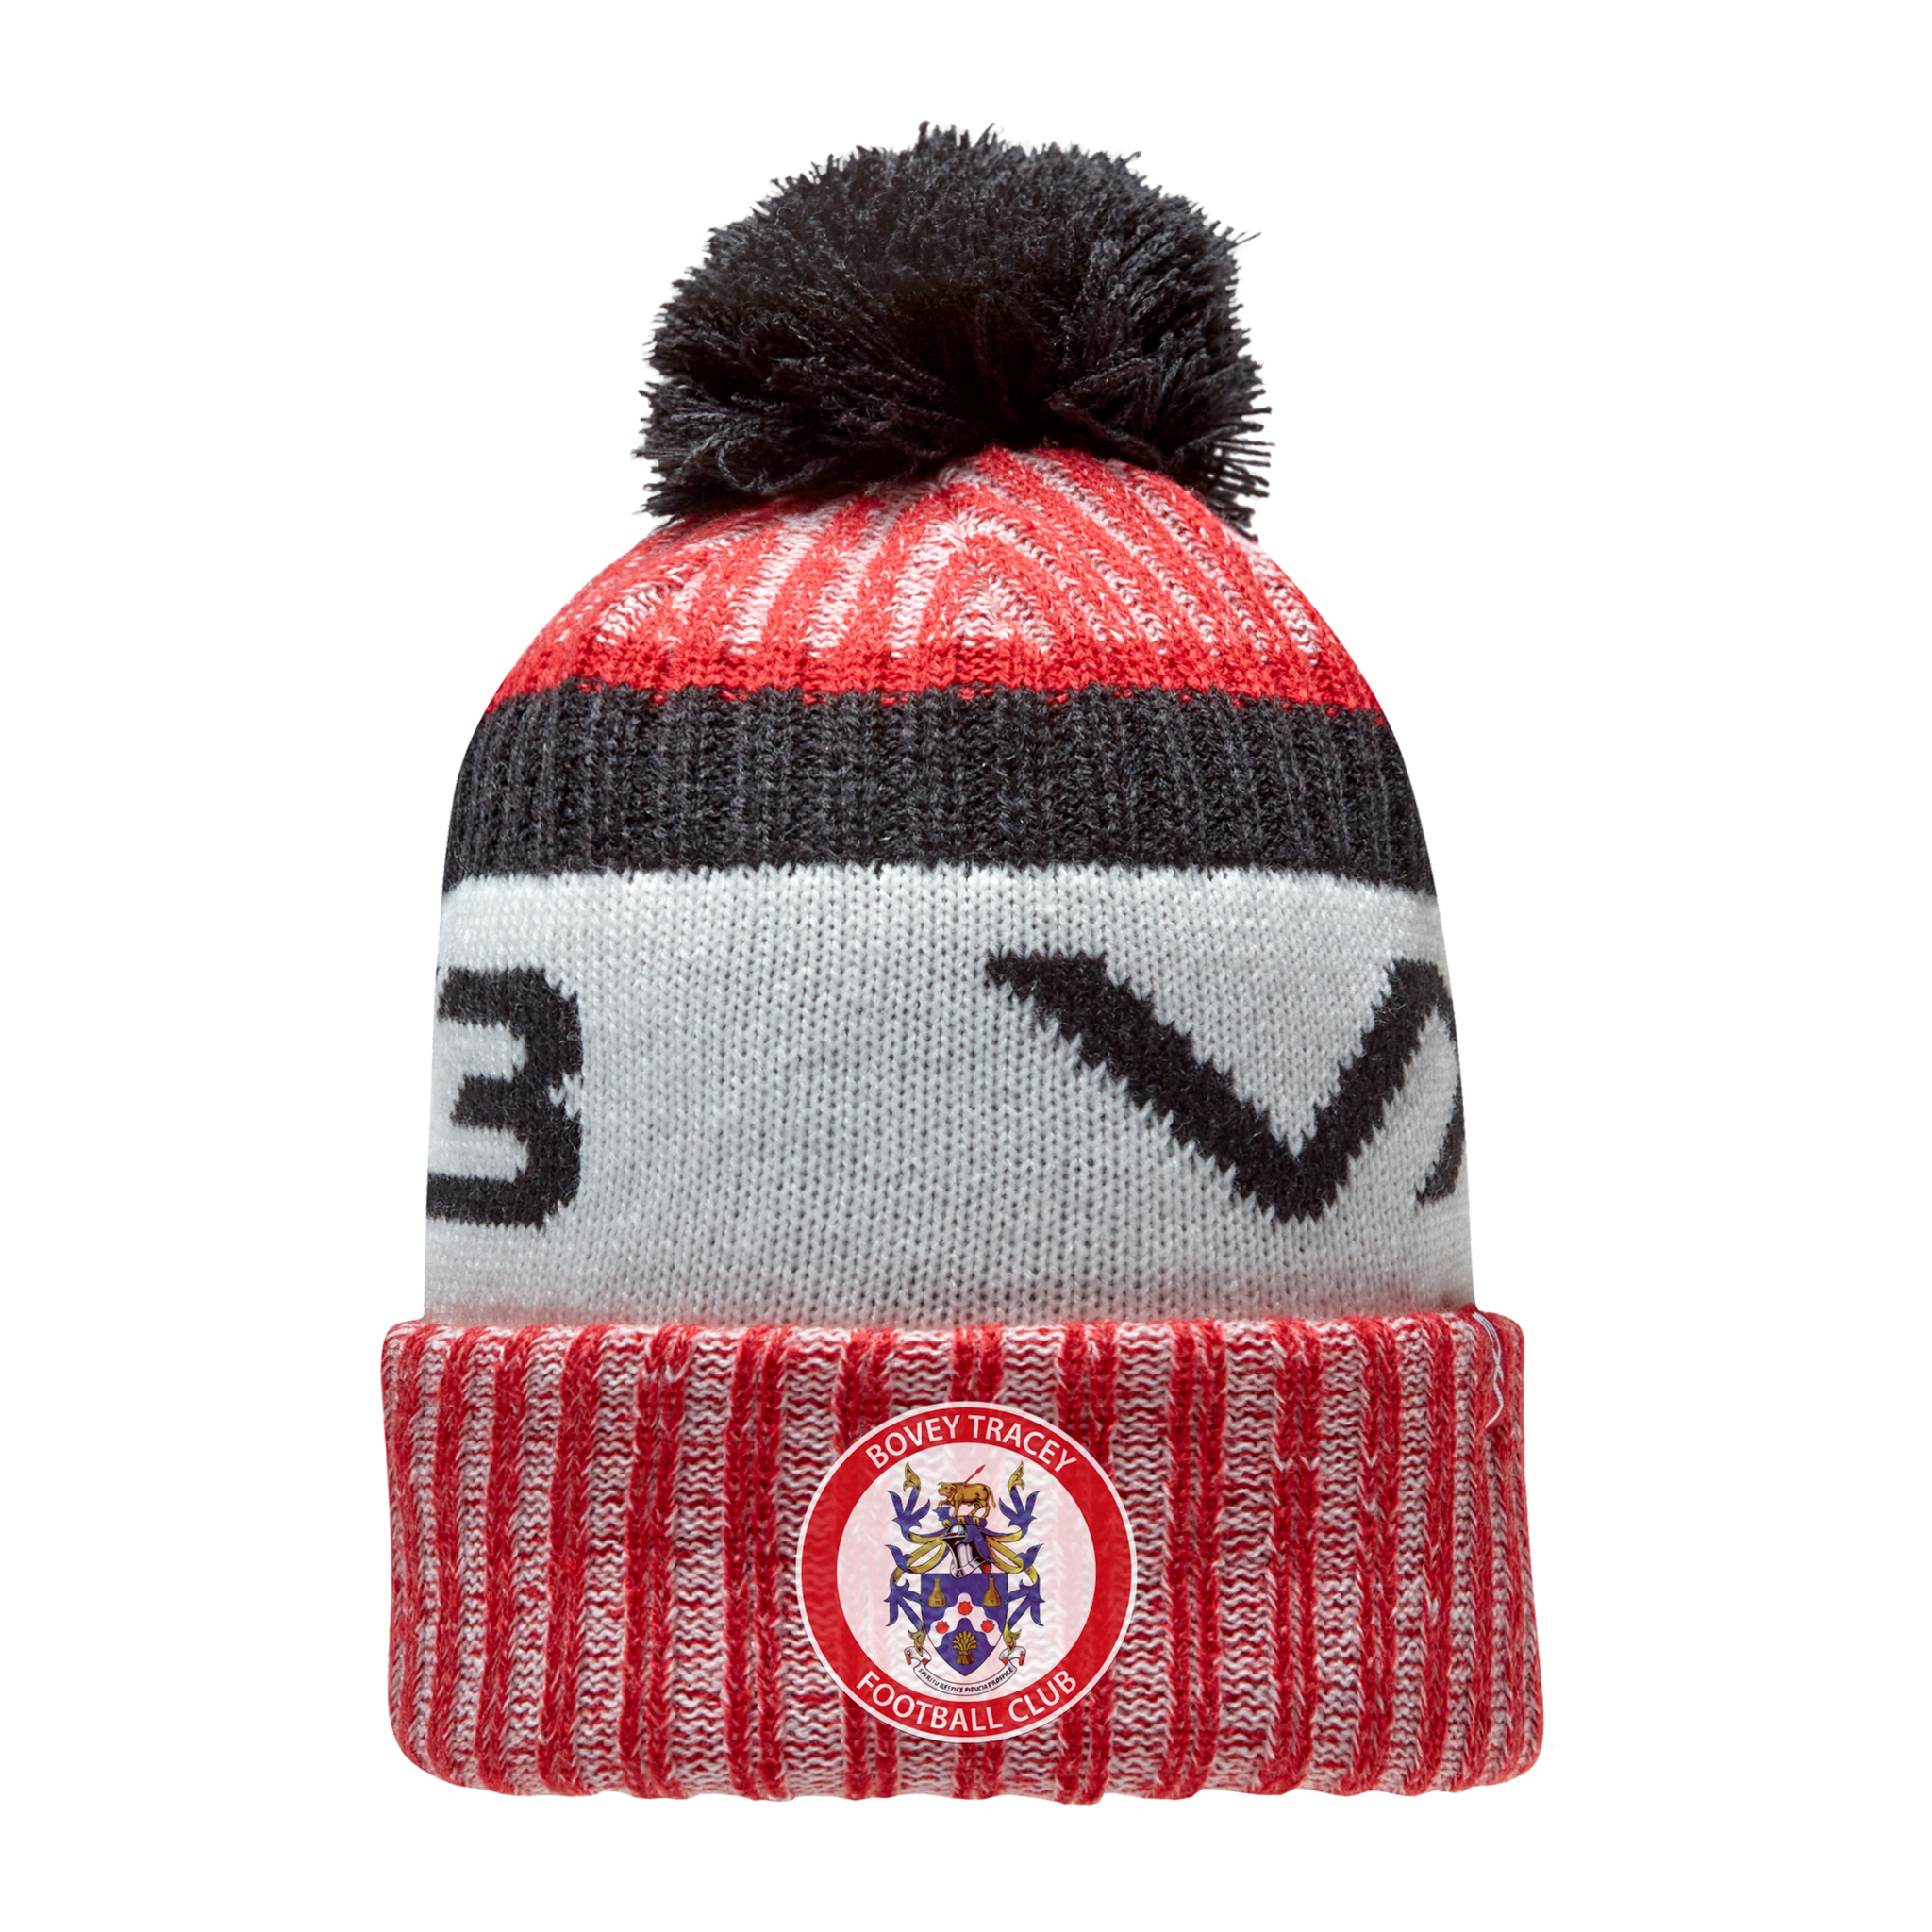 Bovey Tracey AFC Marl Bobble Hat